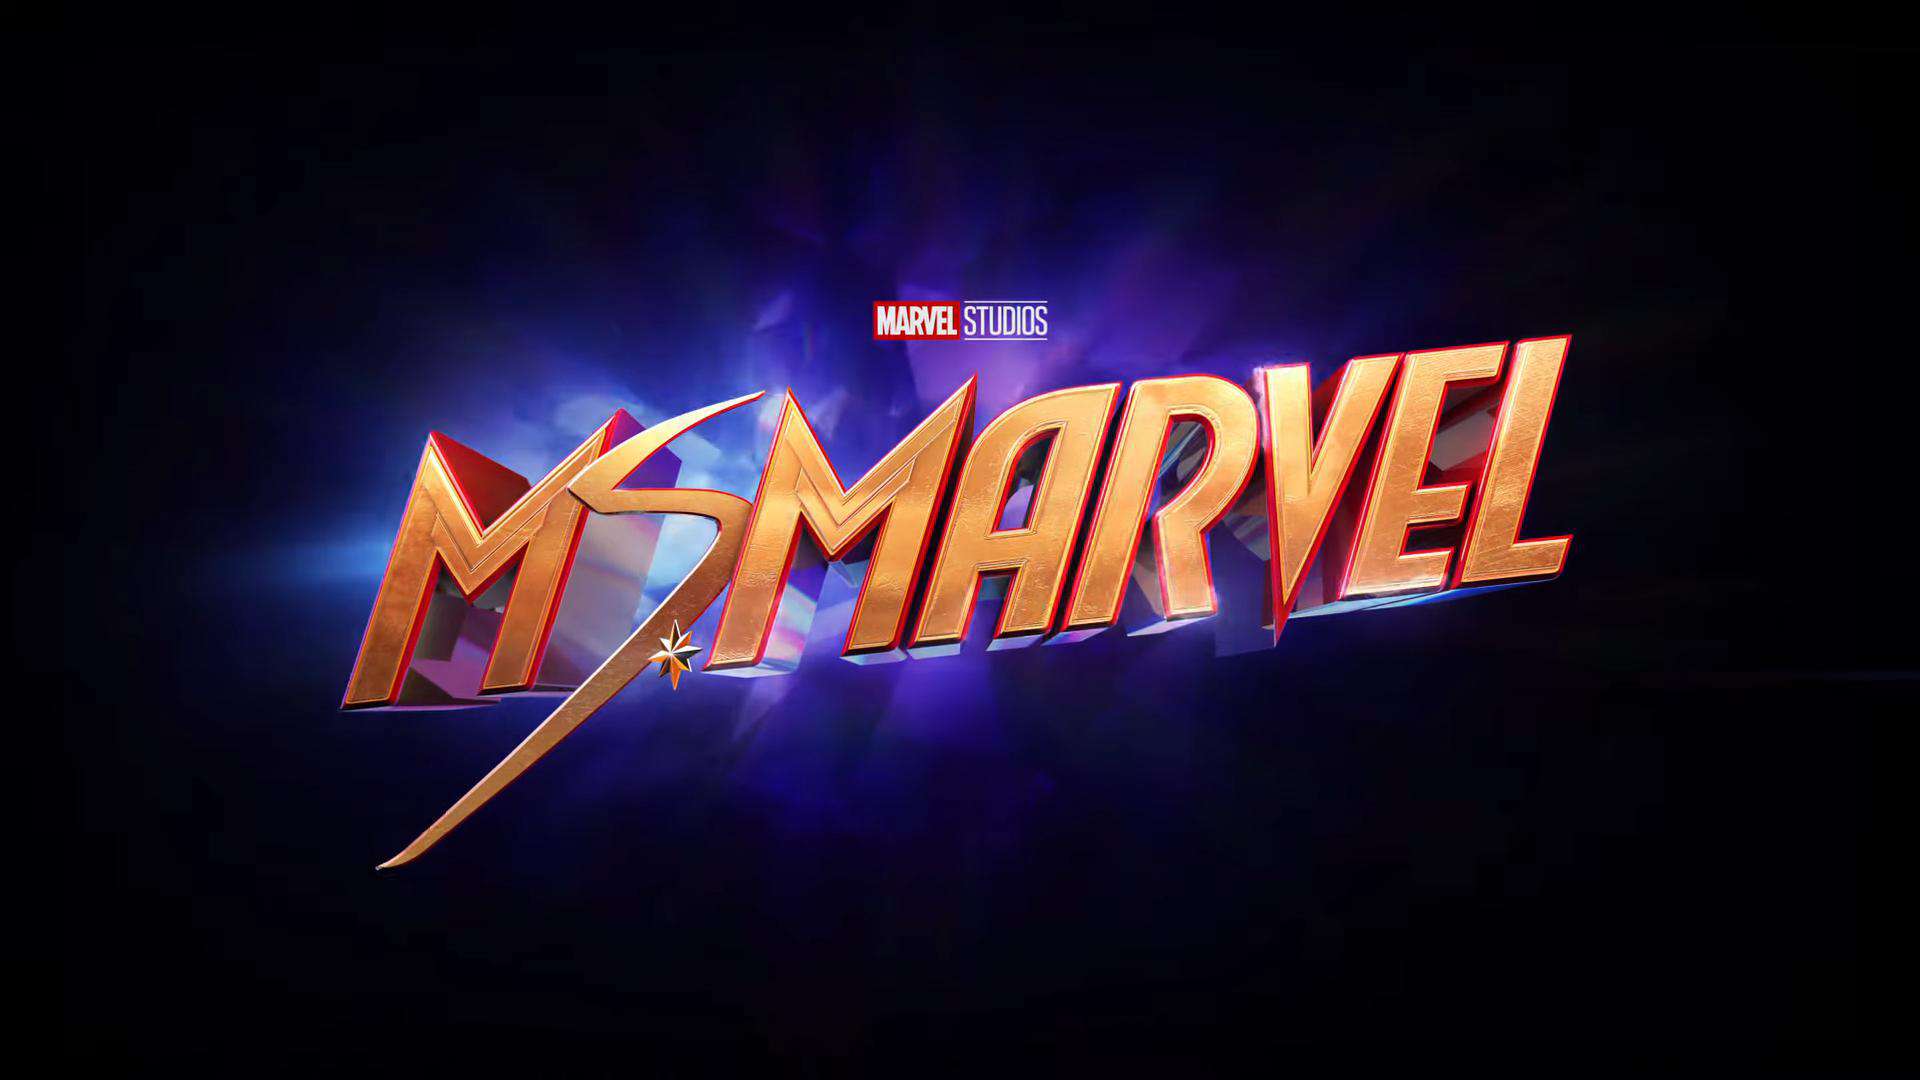 How “Ms. Marvel” Fits Into the Marvel Cinematic Universe